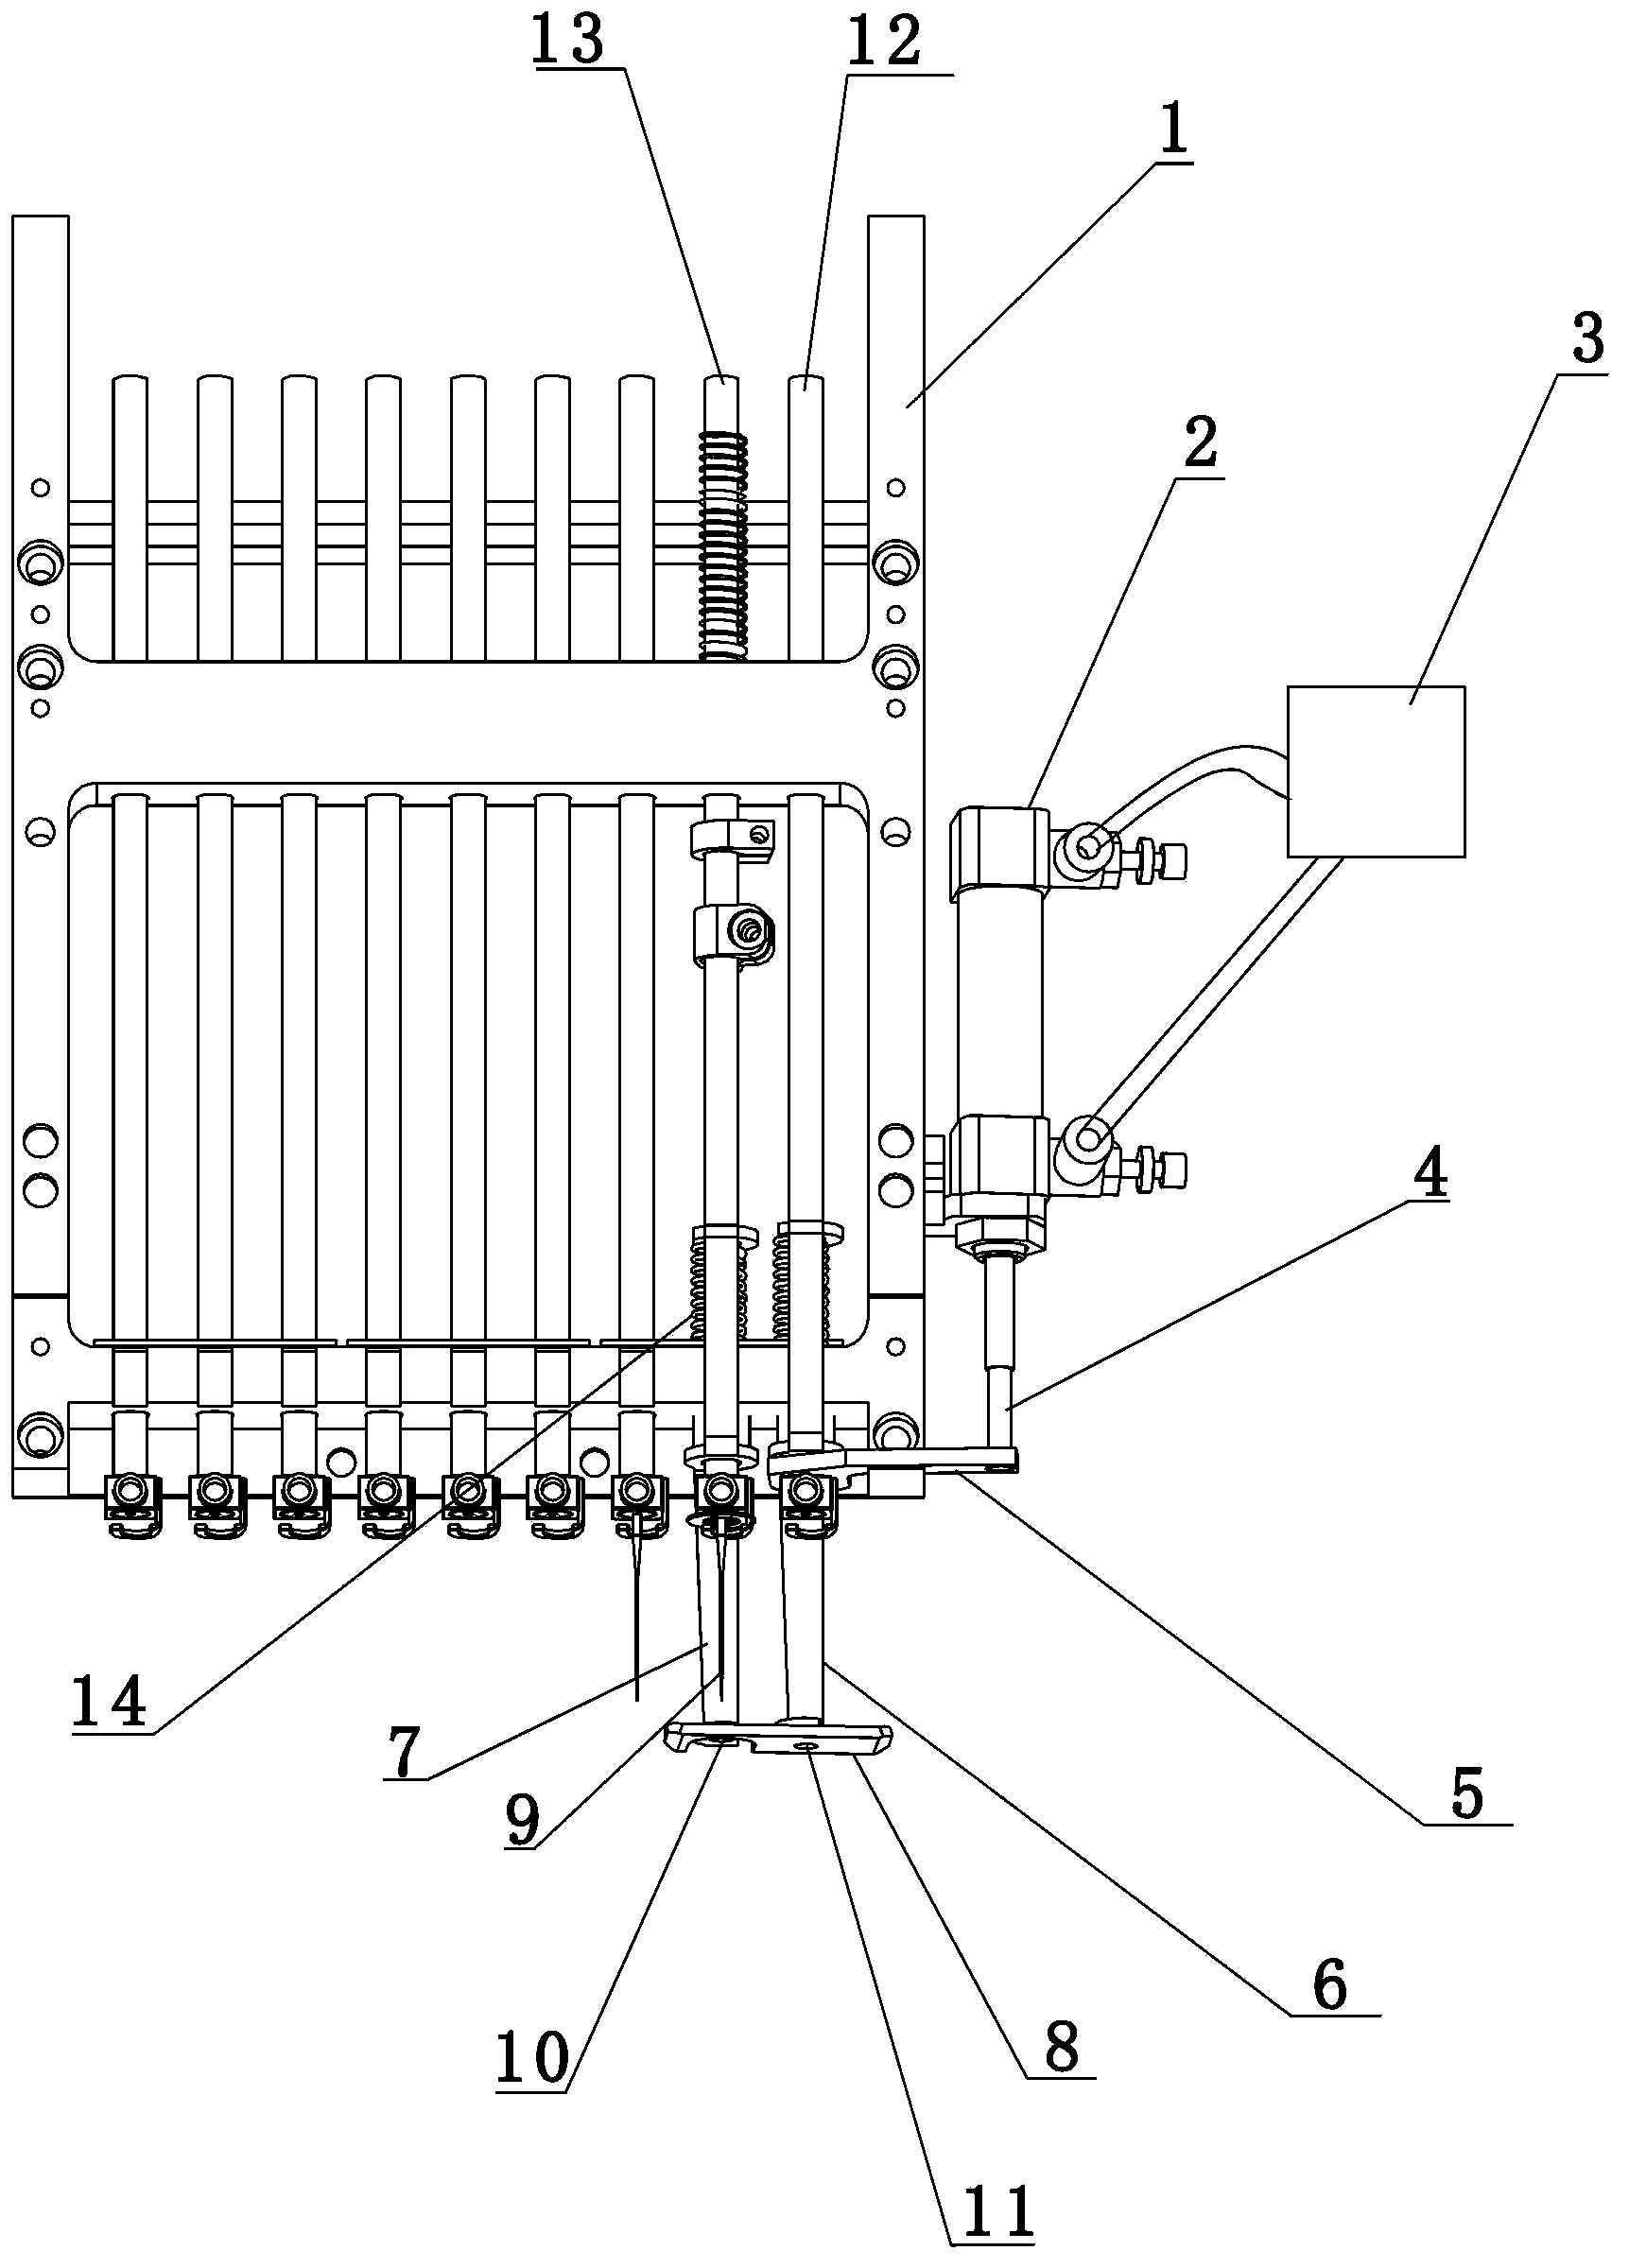 Auxiliary pressing foot of embroidery machine